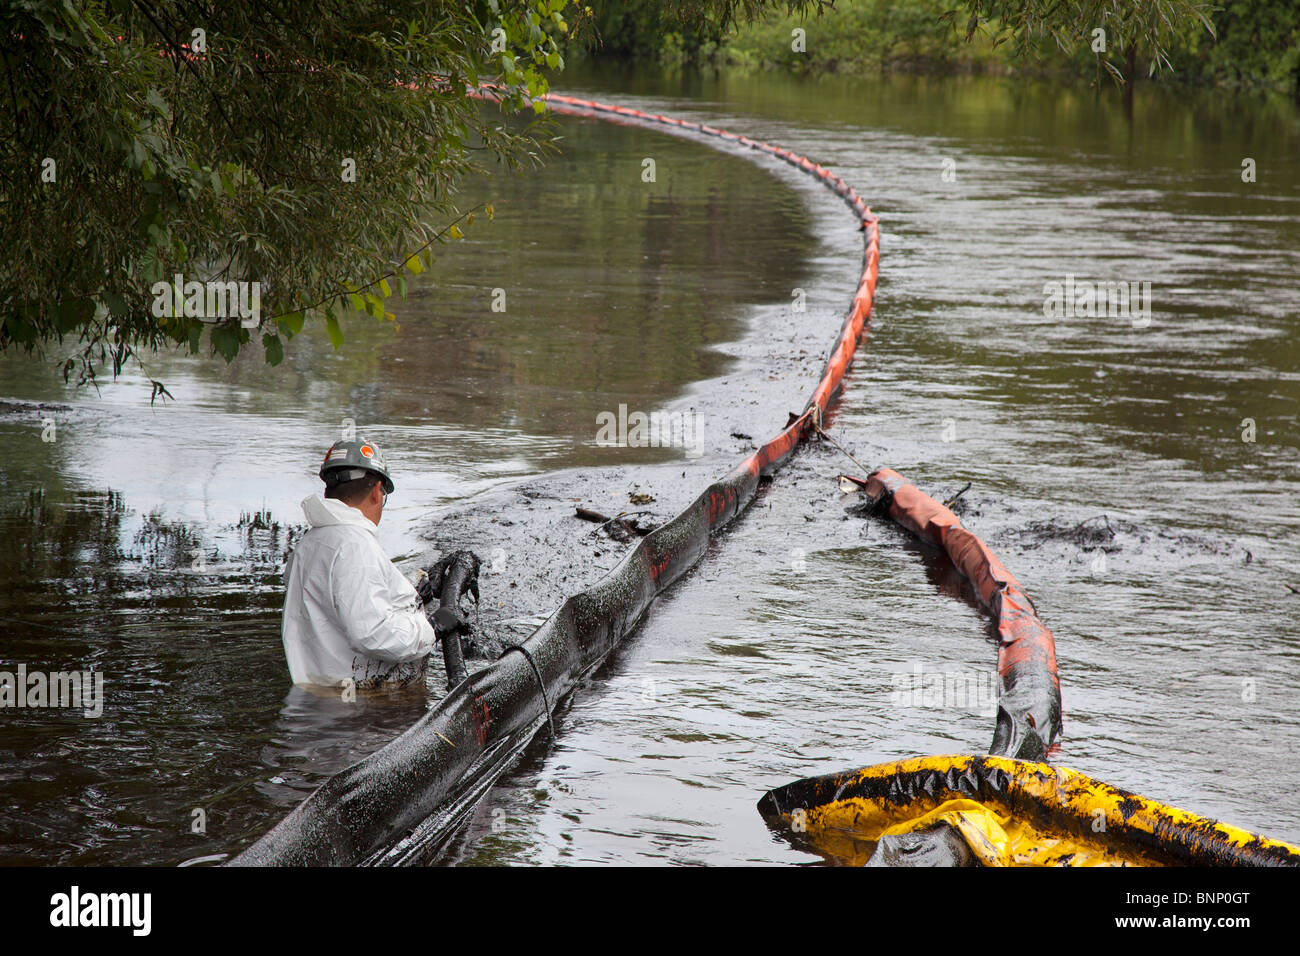 Oil Spill Cleanup Stockfoto